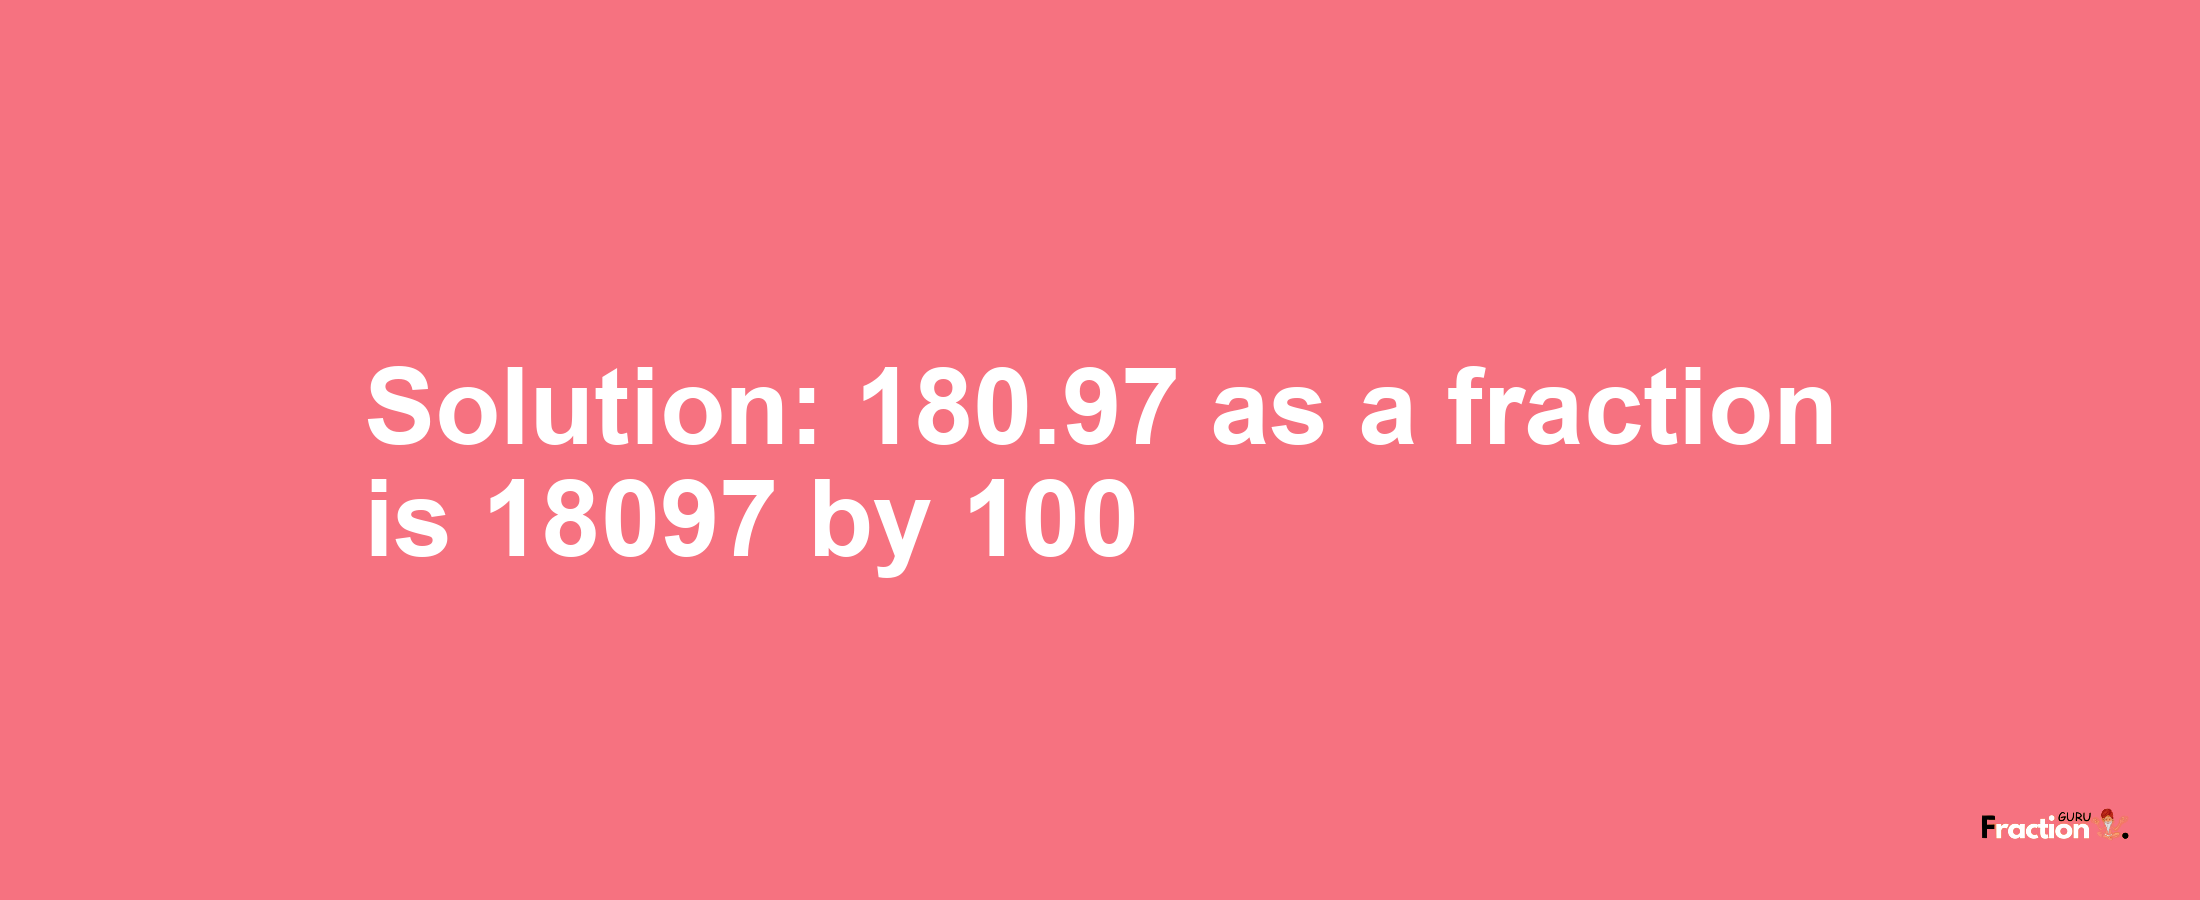 Solution:180.97 as a fraction is 18097/100